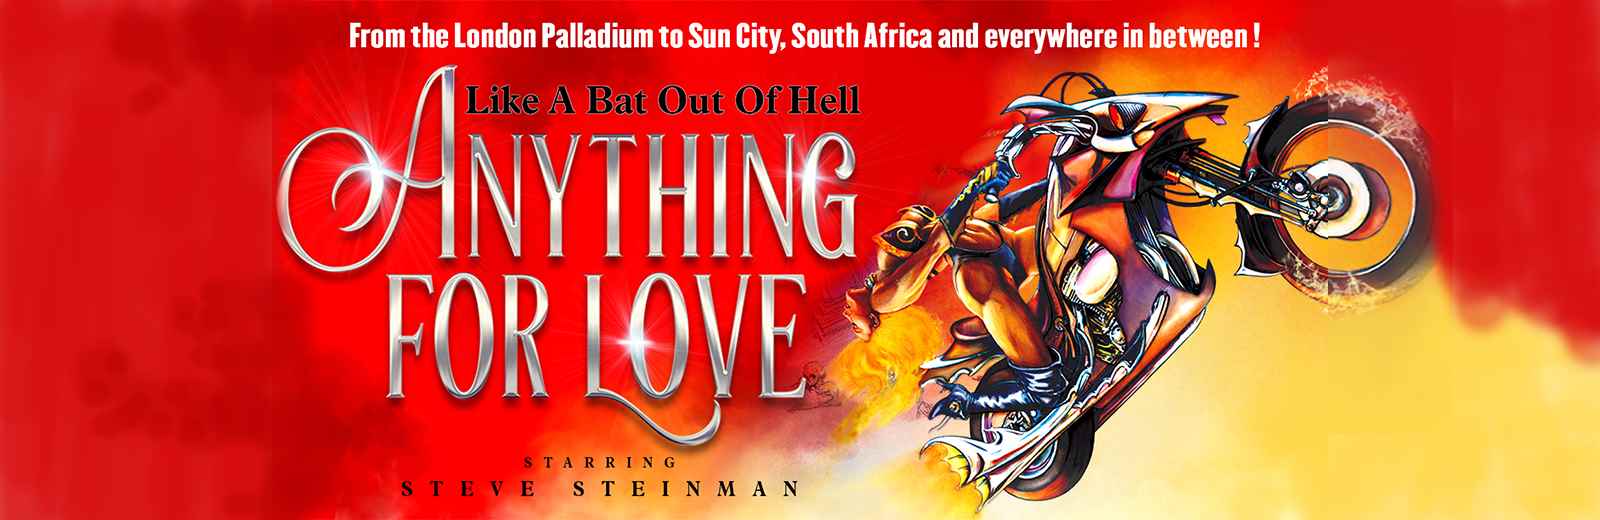 Steve Steinman’s Anything For Love - The Meatloaf Story